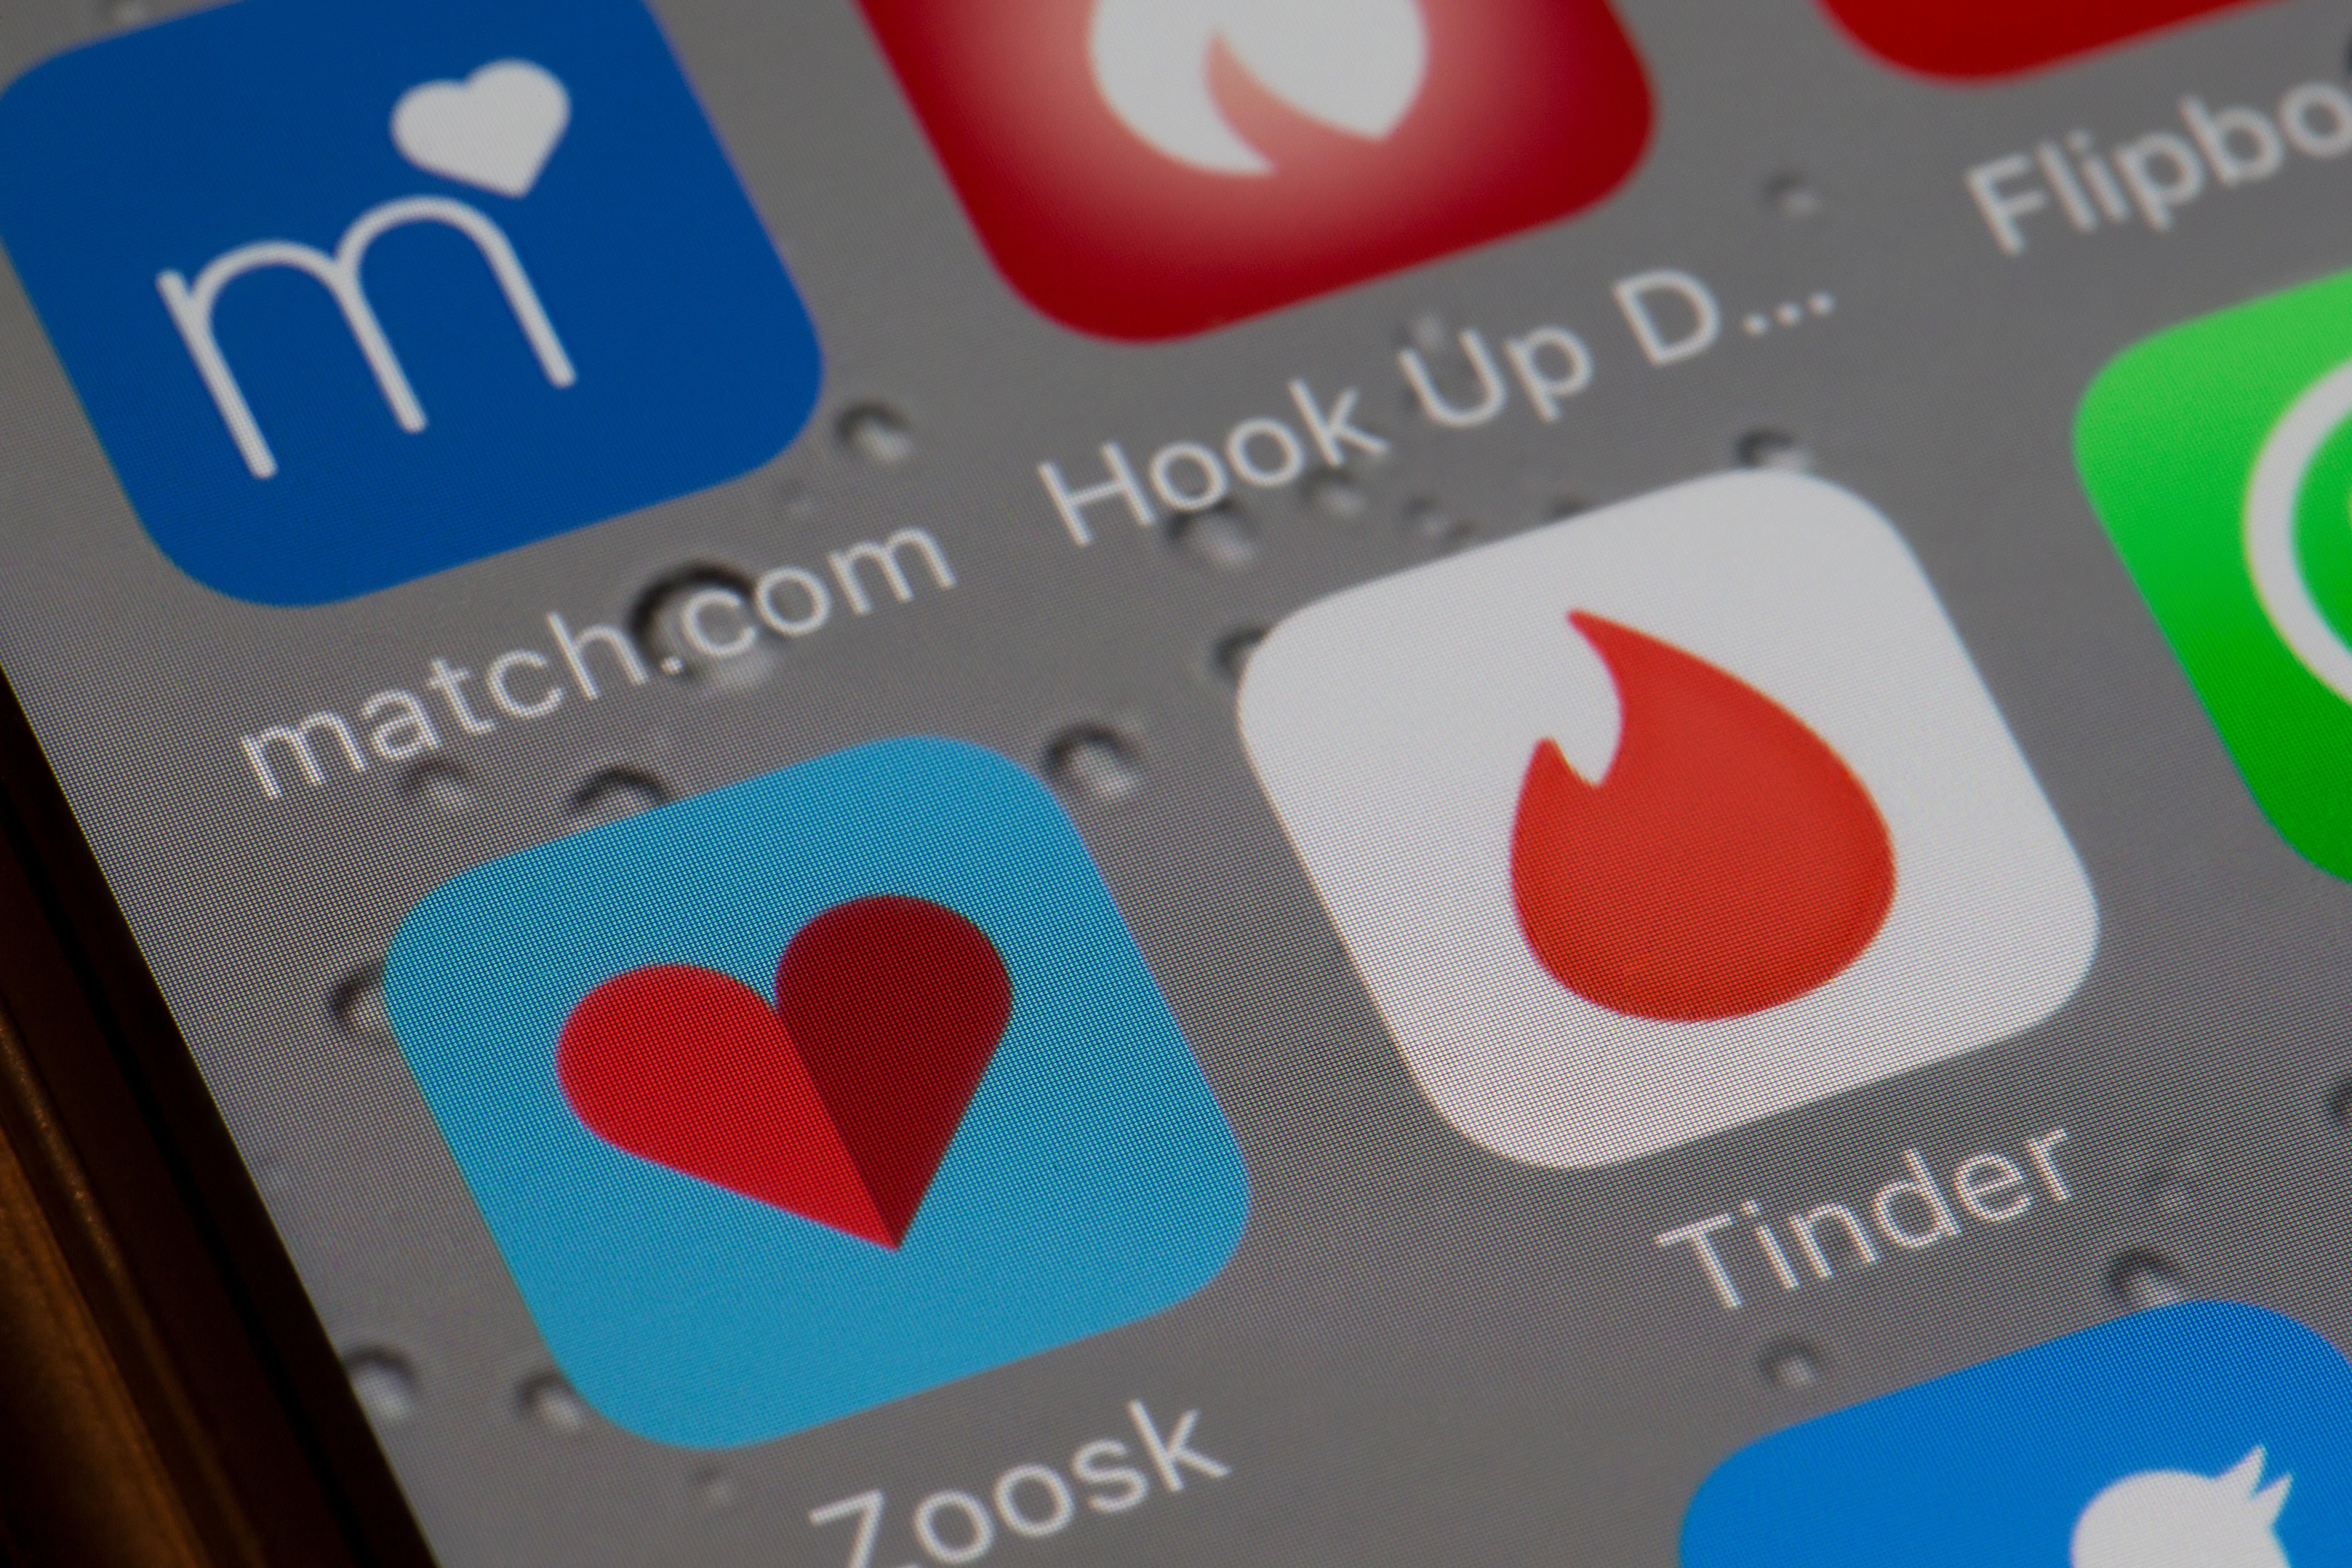 Dating apps can make it really easy to become consumed by finding someone (Alamy/PA)